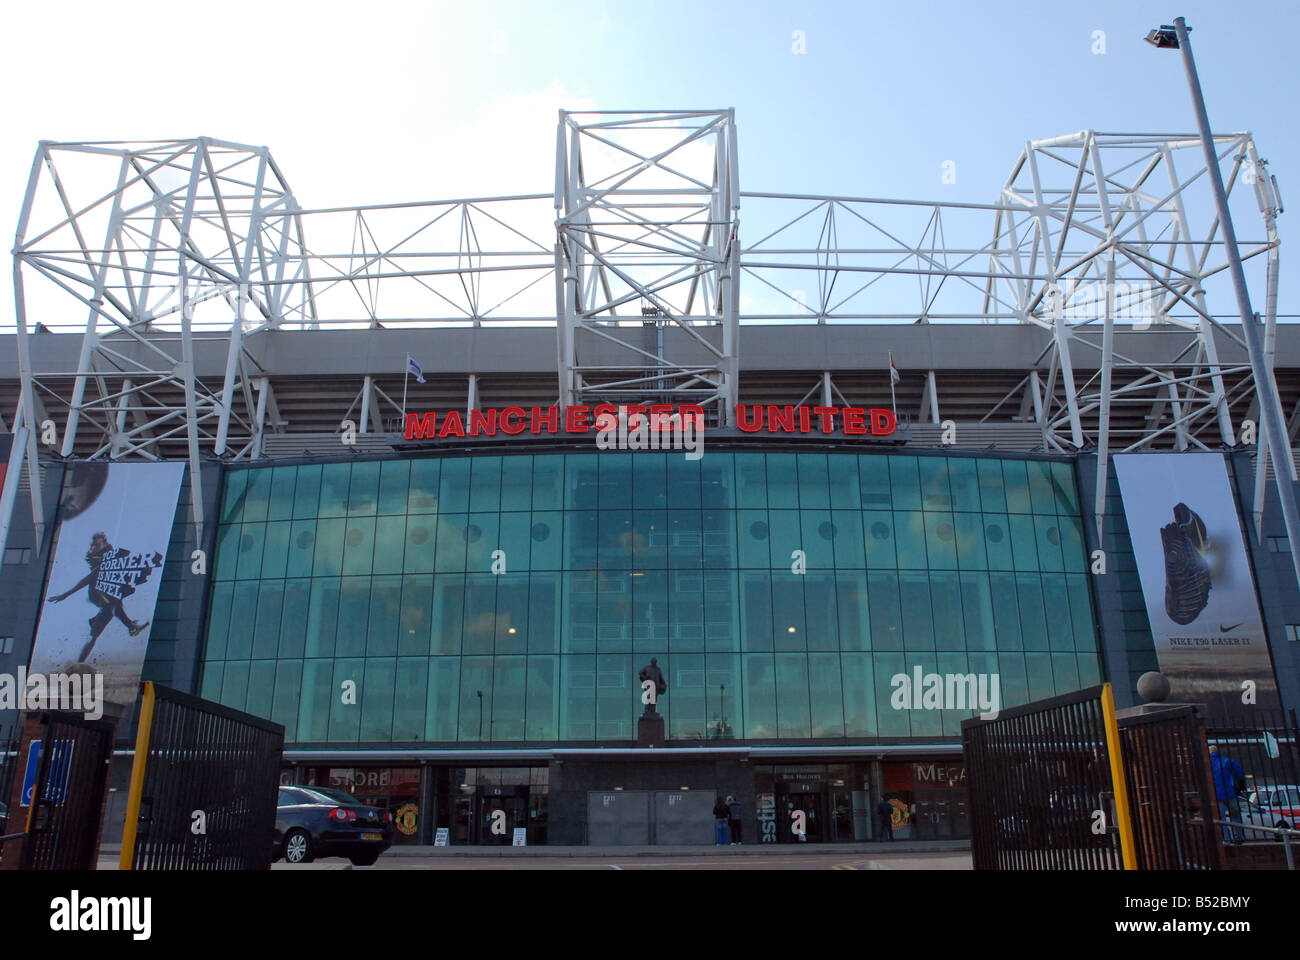 Old Trafford Manchester united Football Club mufc Stockfoto